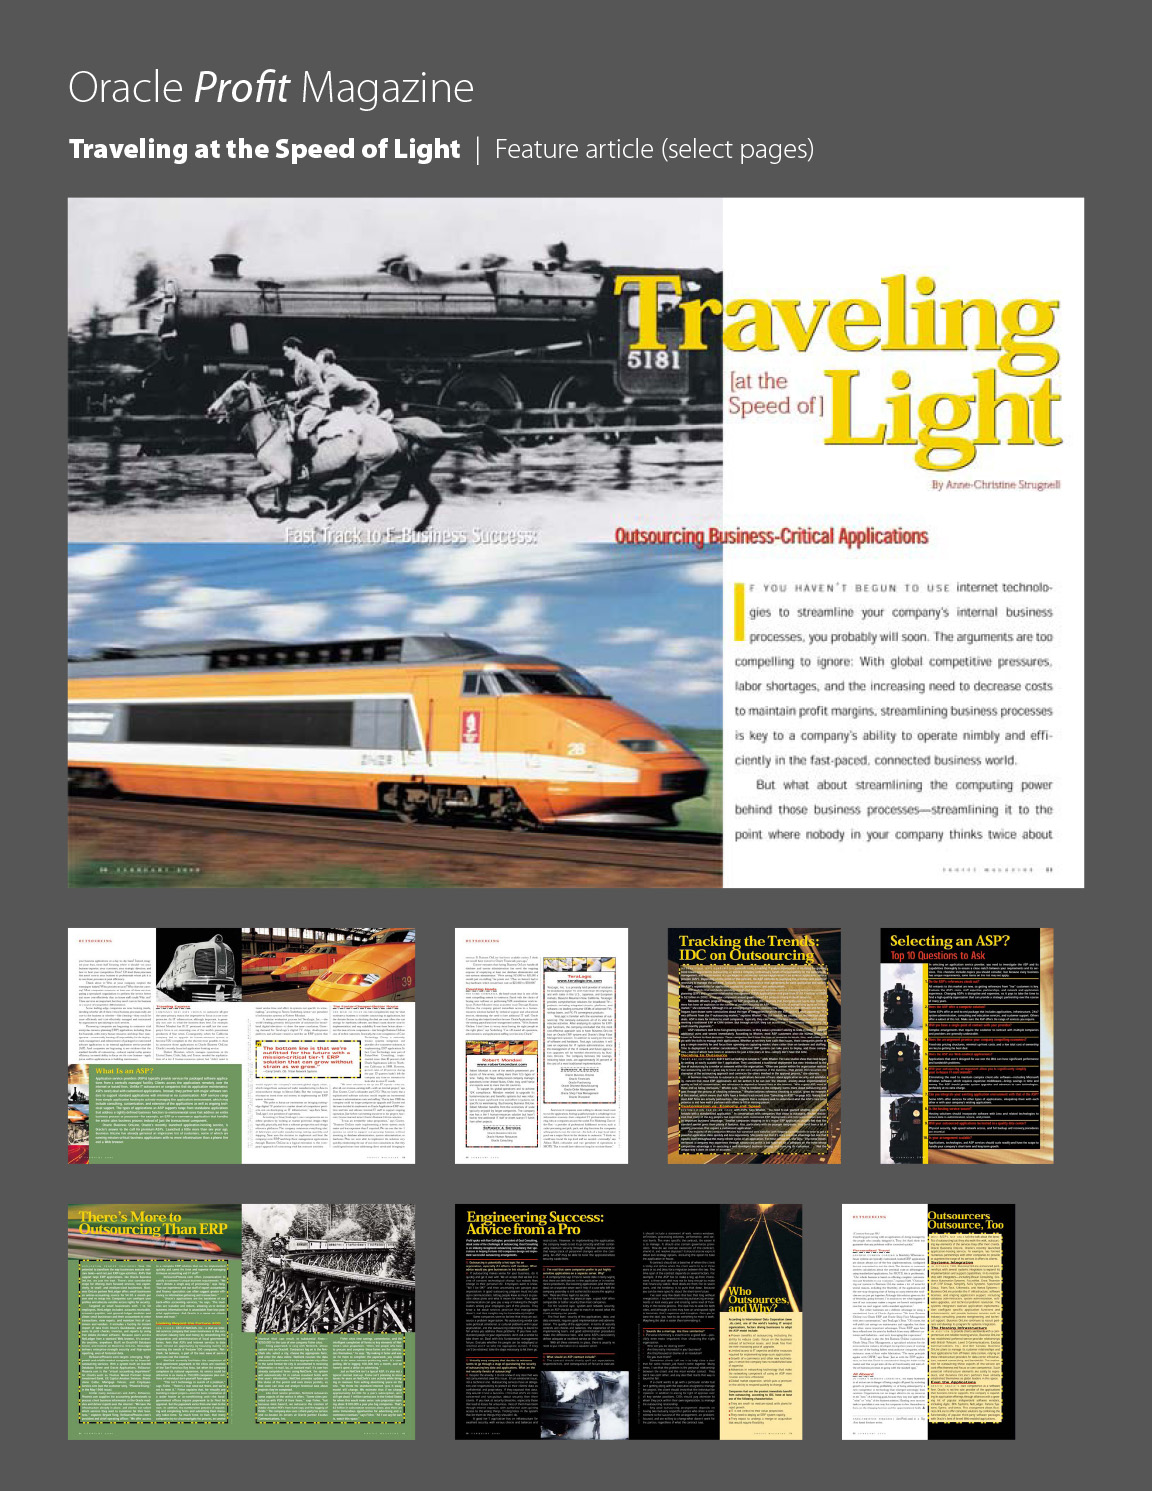 Oracle Profit magazine feature, Traveling with the Speed of Light